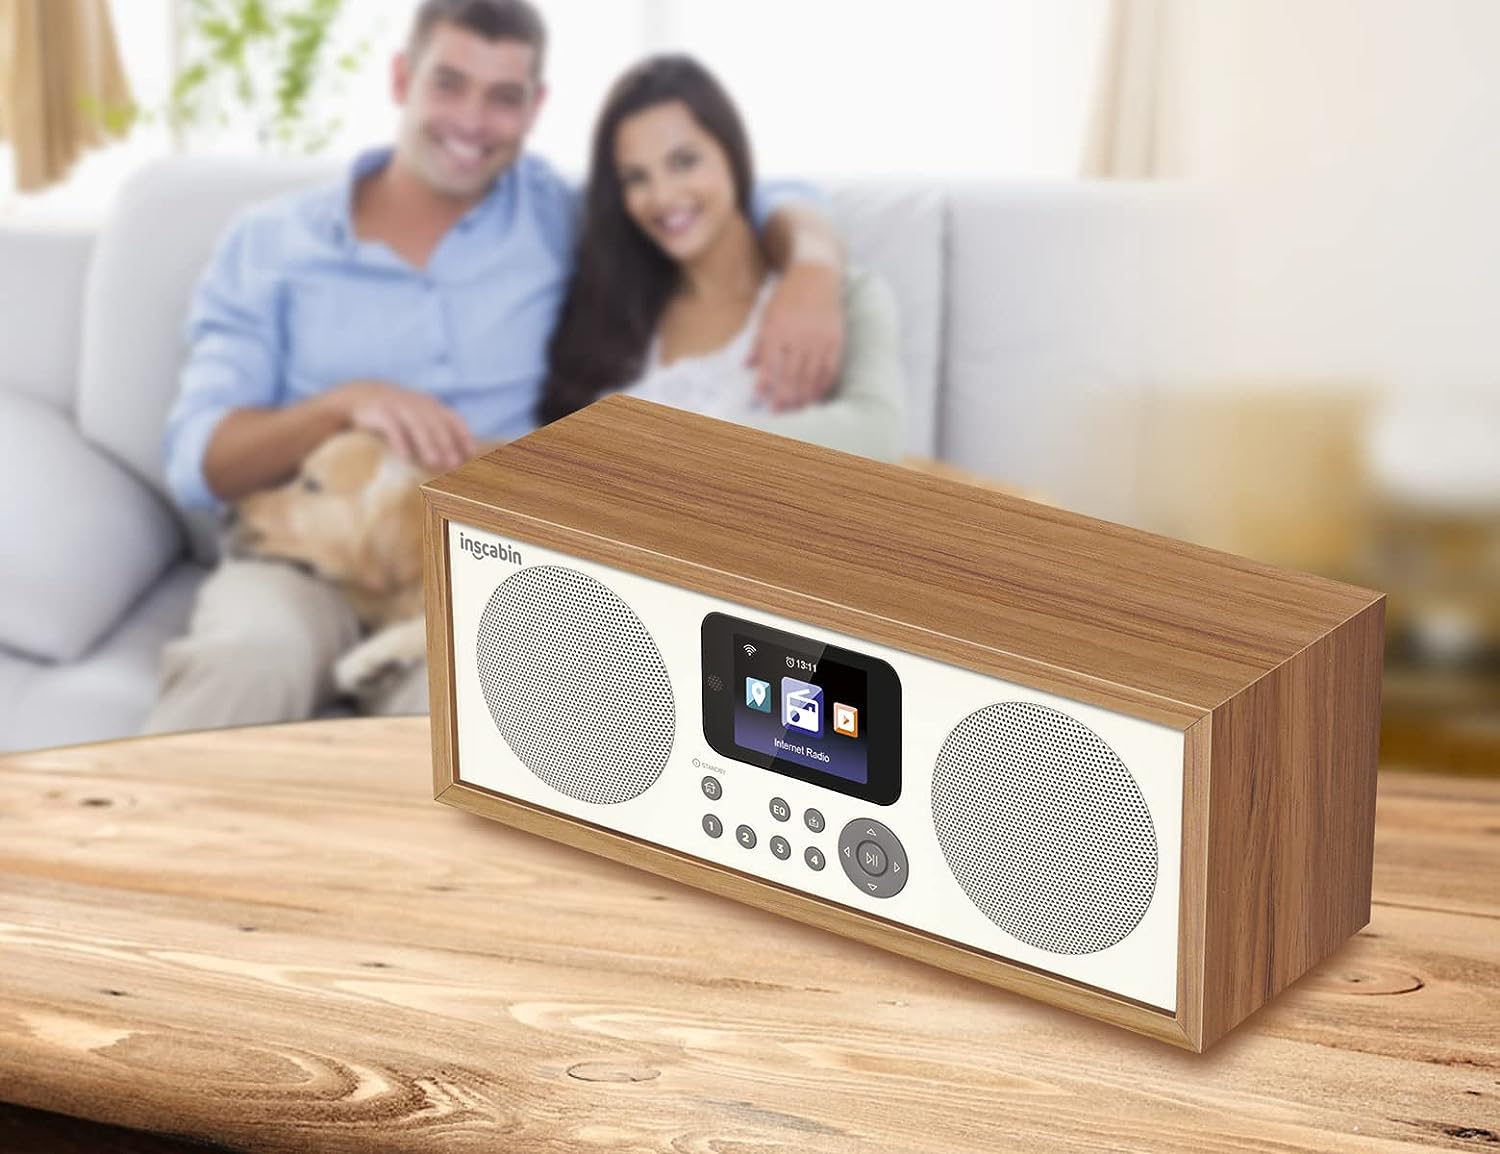 Inscabin D4 Portable Internet Radio with Bluetooth Spotify Connect